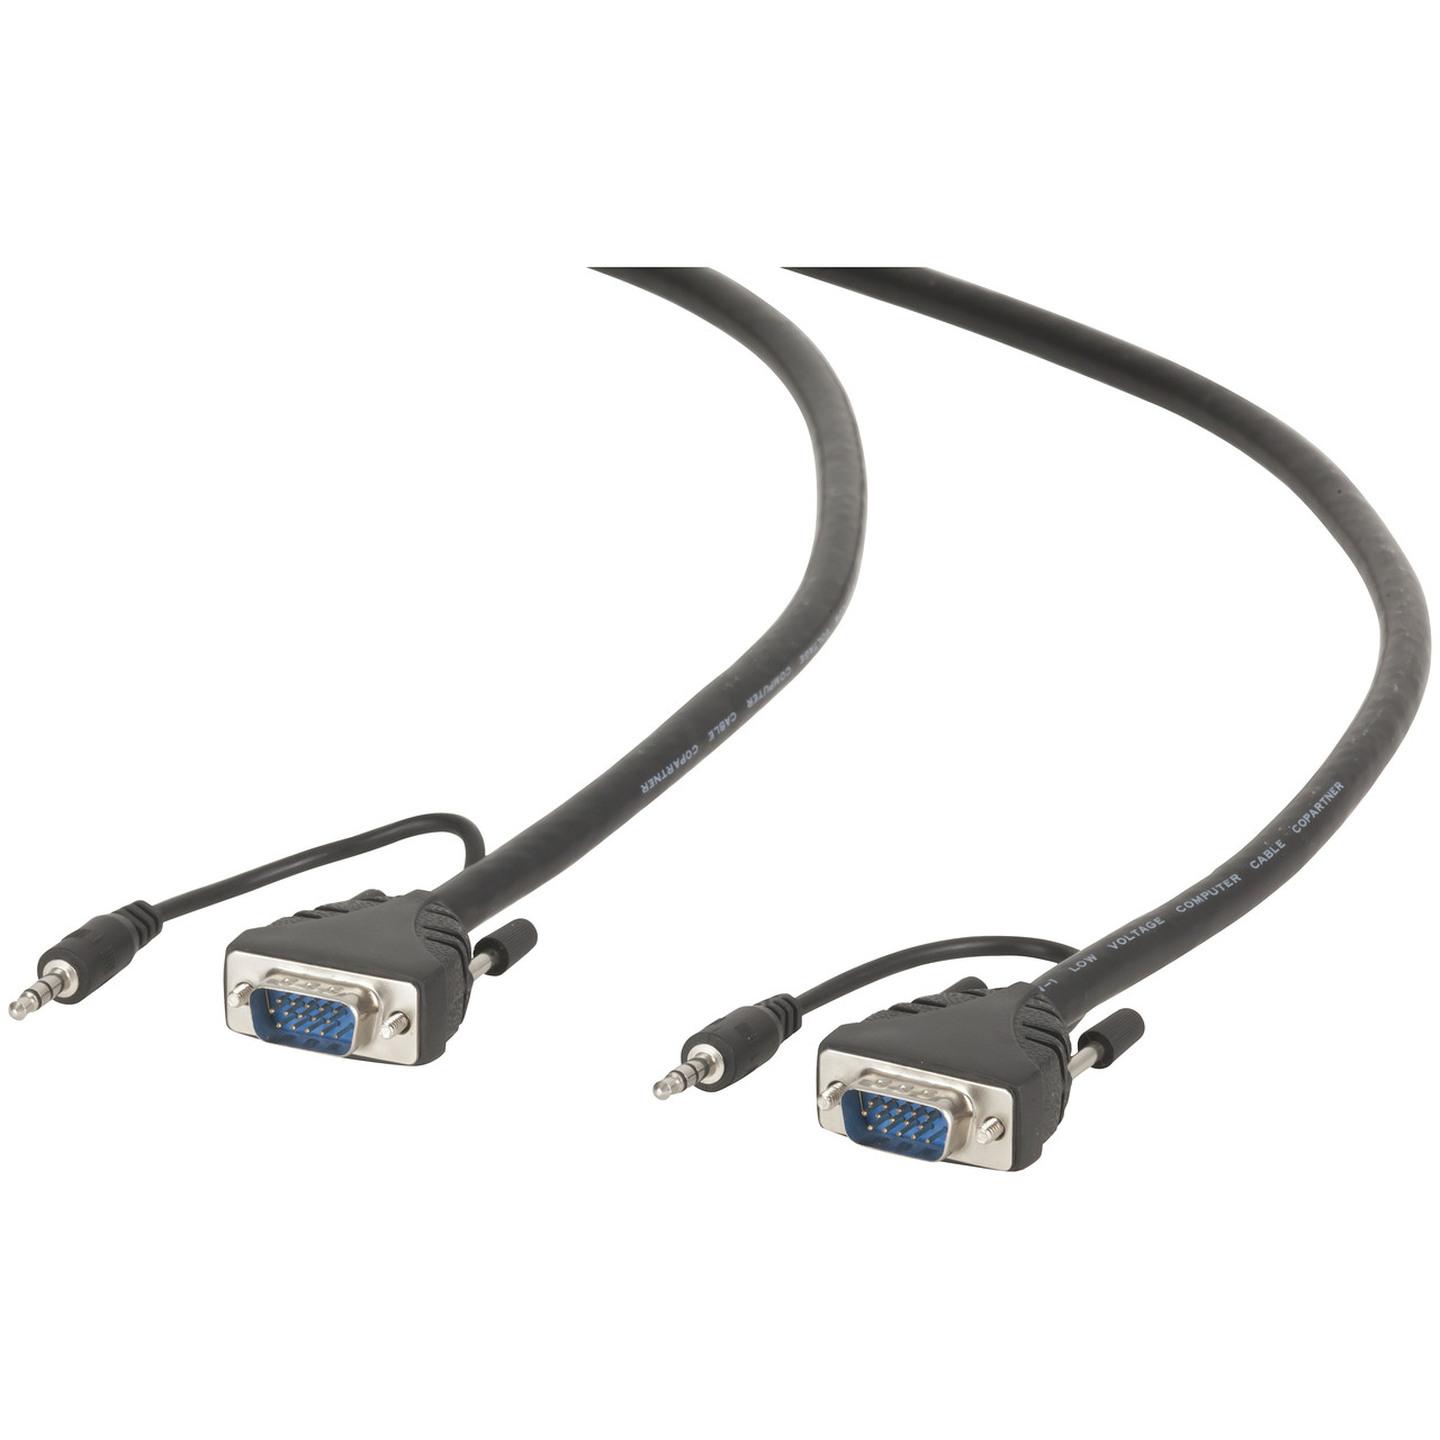 VGA Monitor Cable with 3.5mm Audio 1.8m